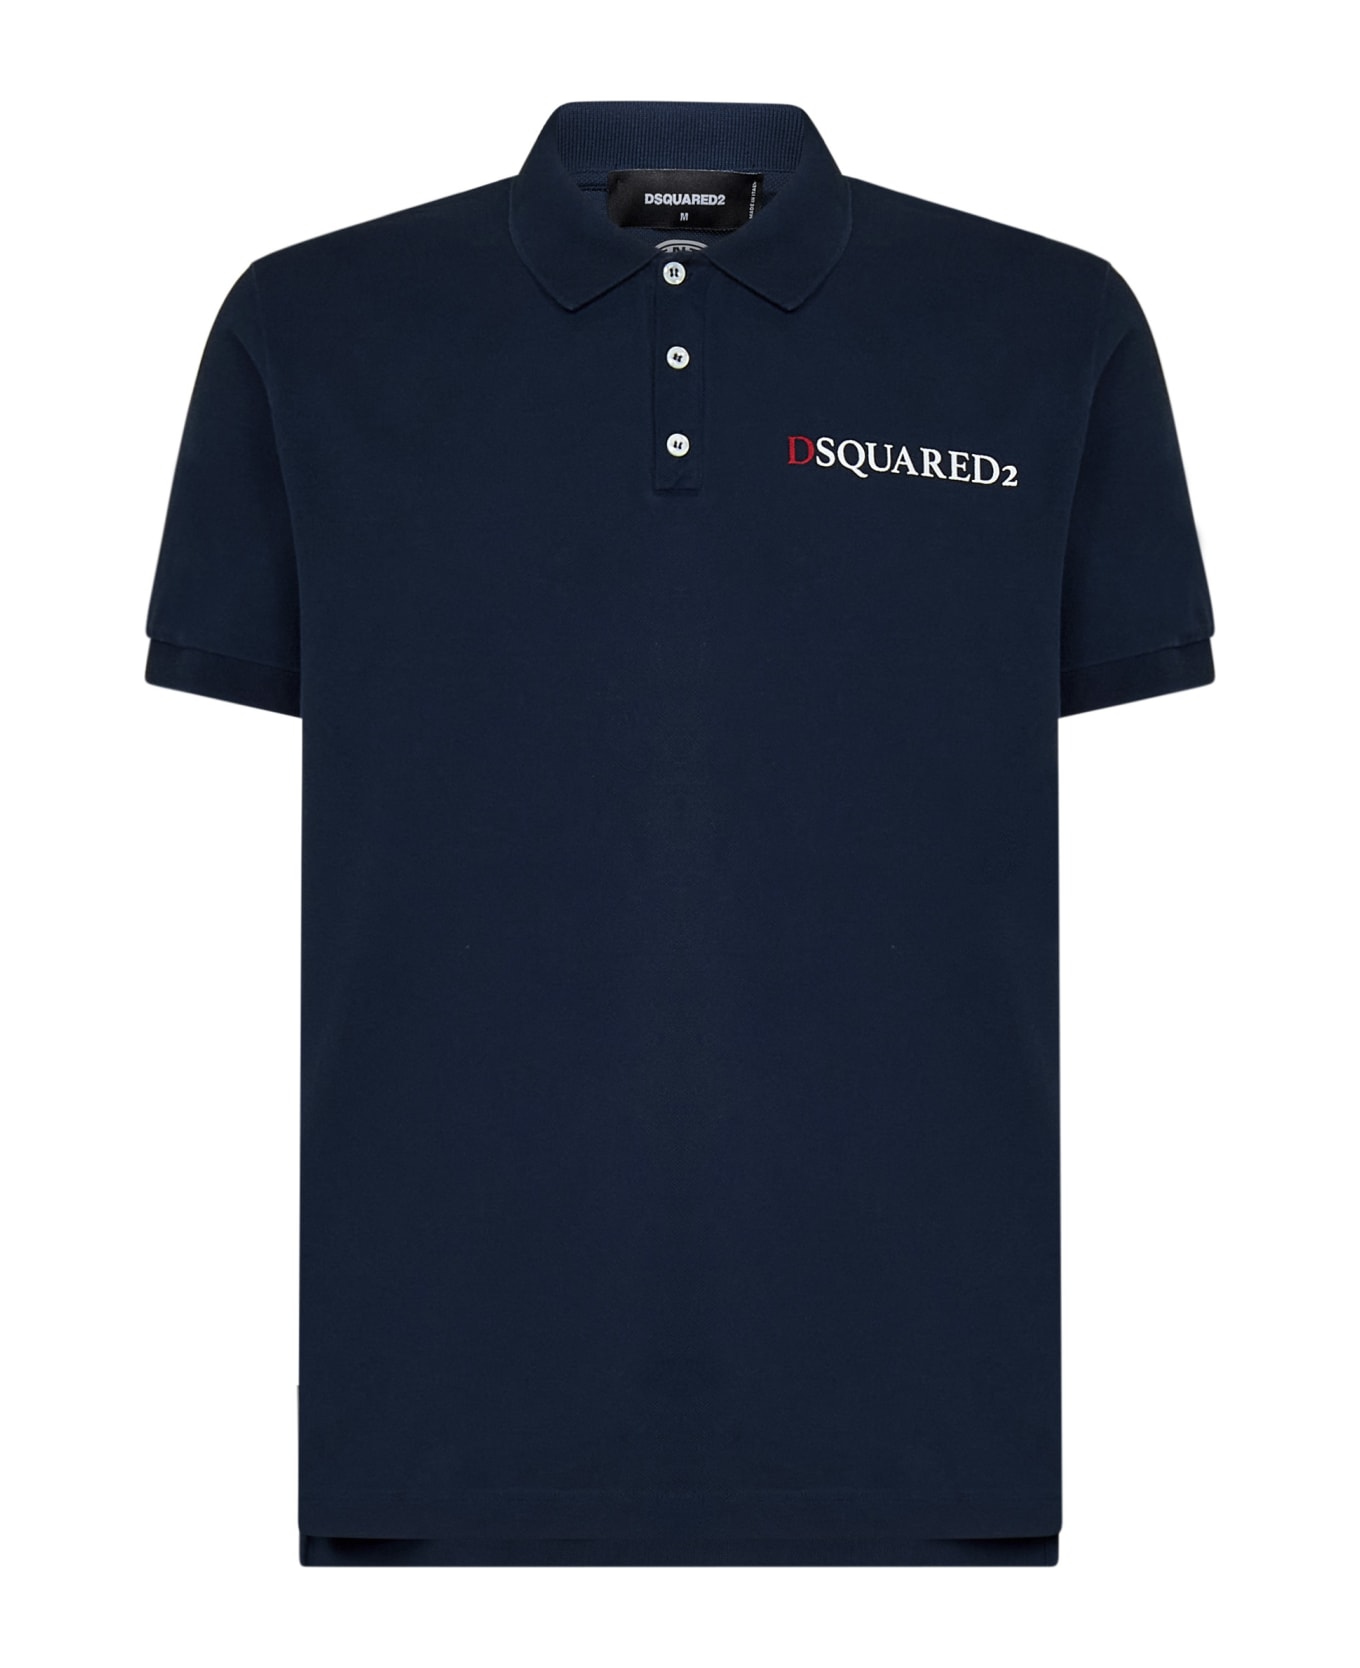 Dsquared2 Backdoor Access Tennis Fit Polo Shirt - Blue